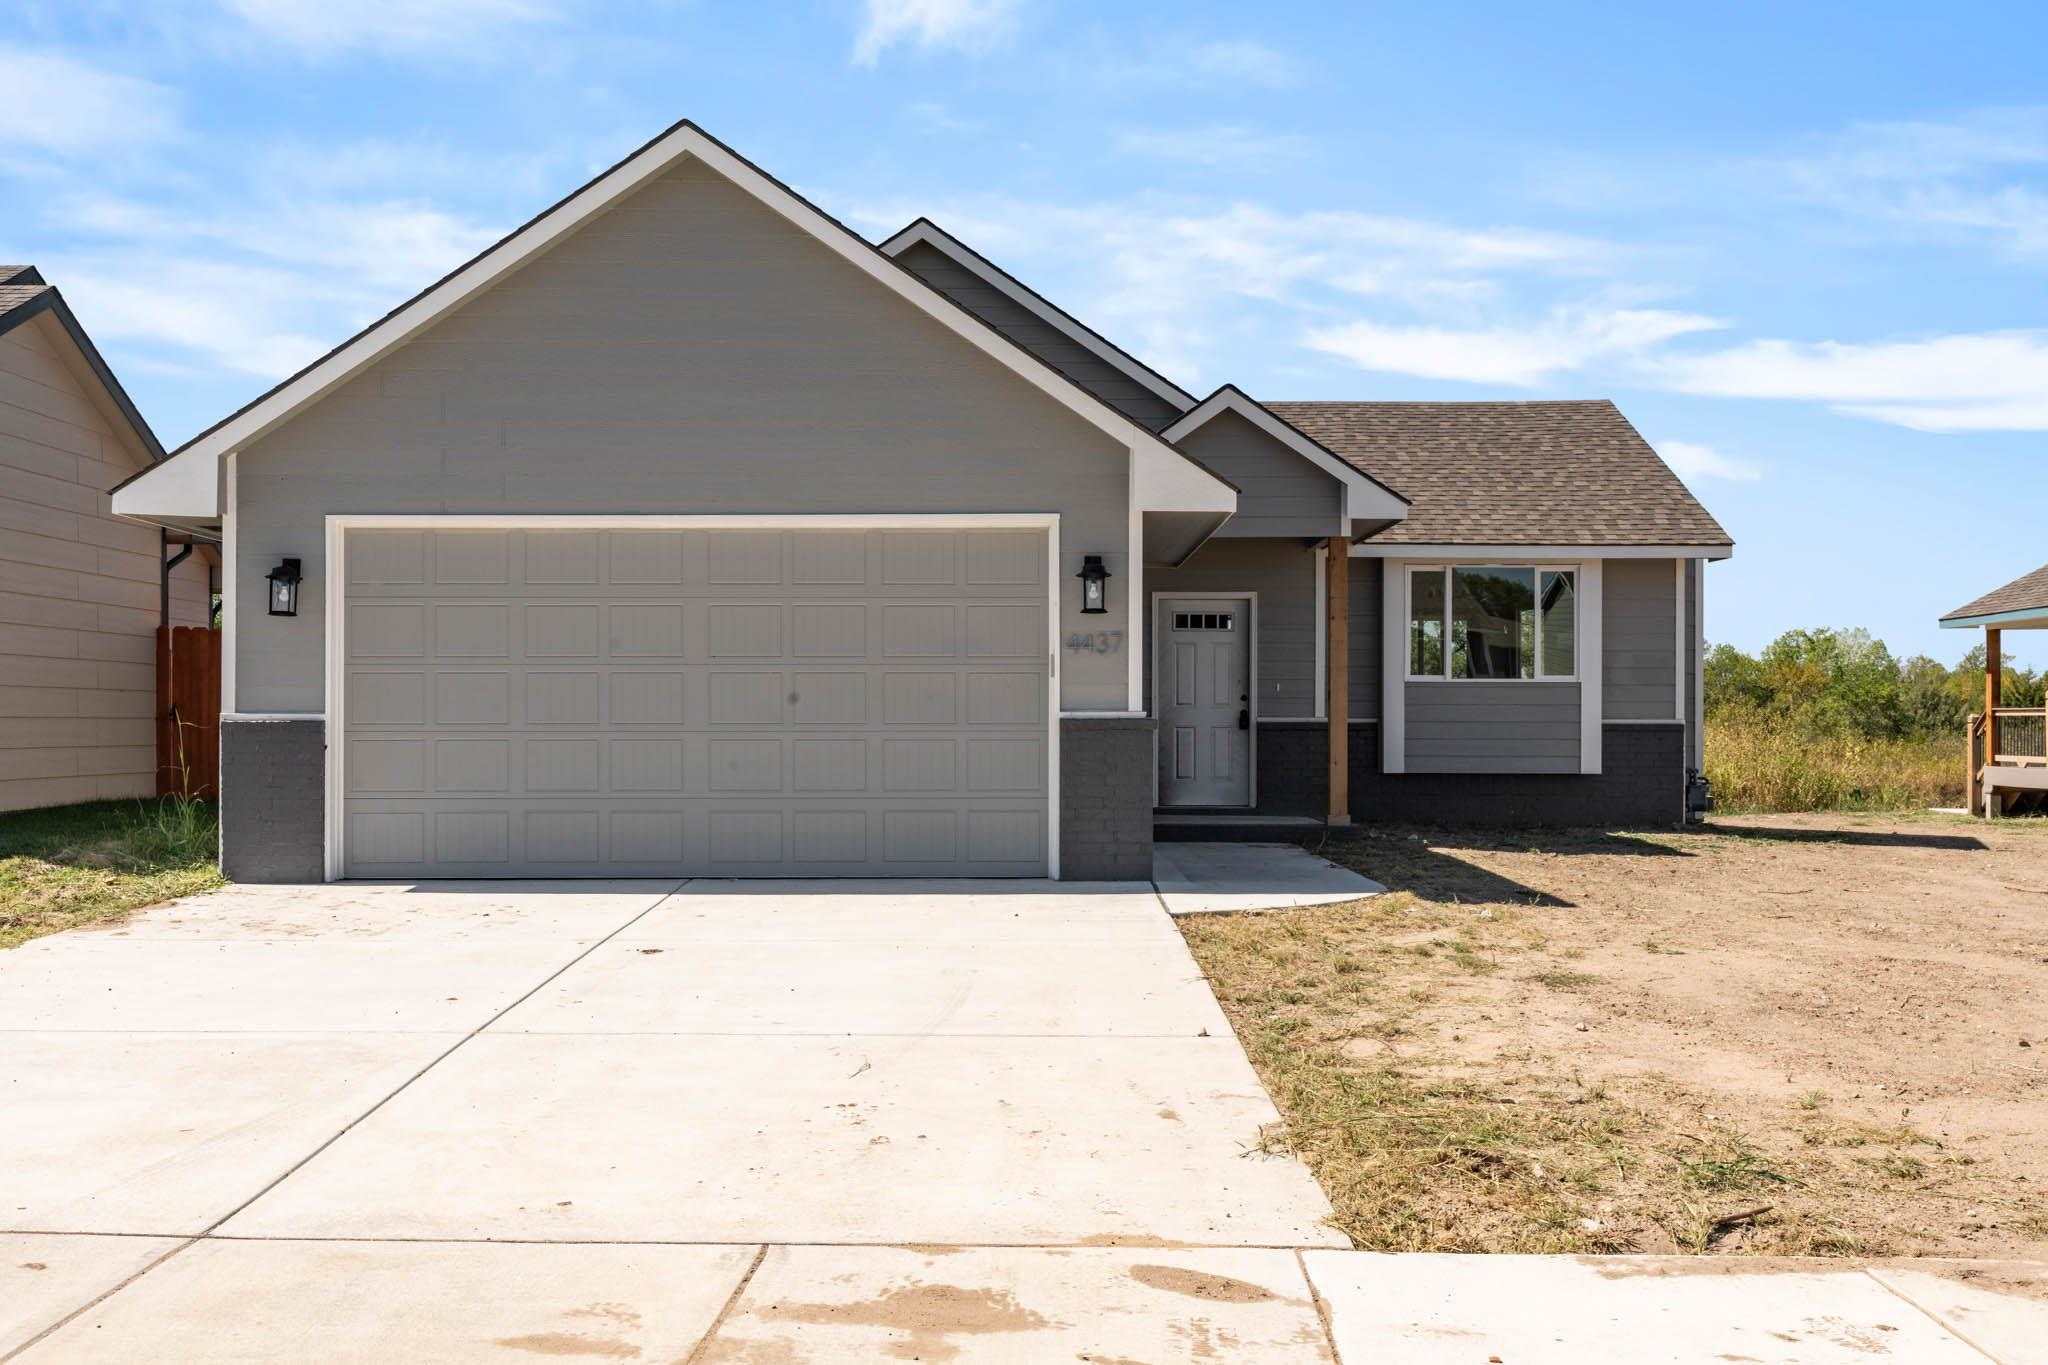 Welcome home to this 3 bedroom, 2 bathroom home. This home features kitchen island, granite countert